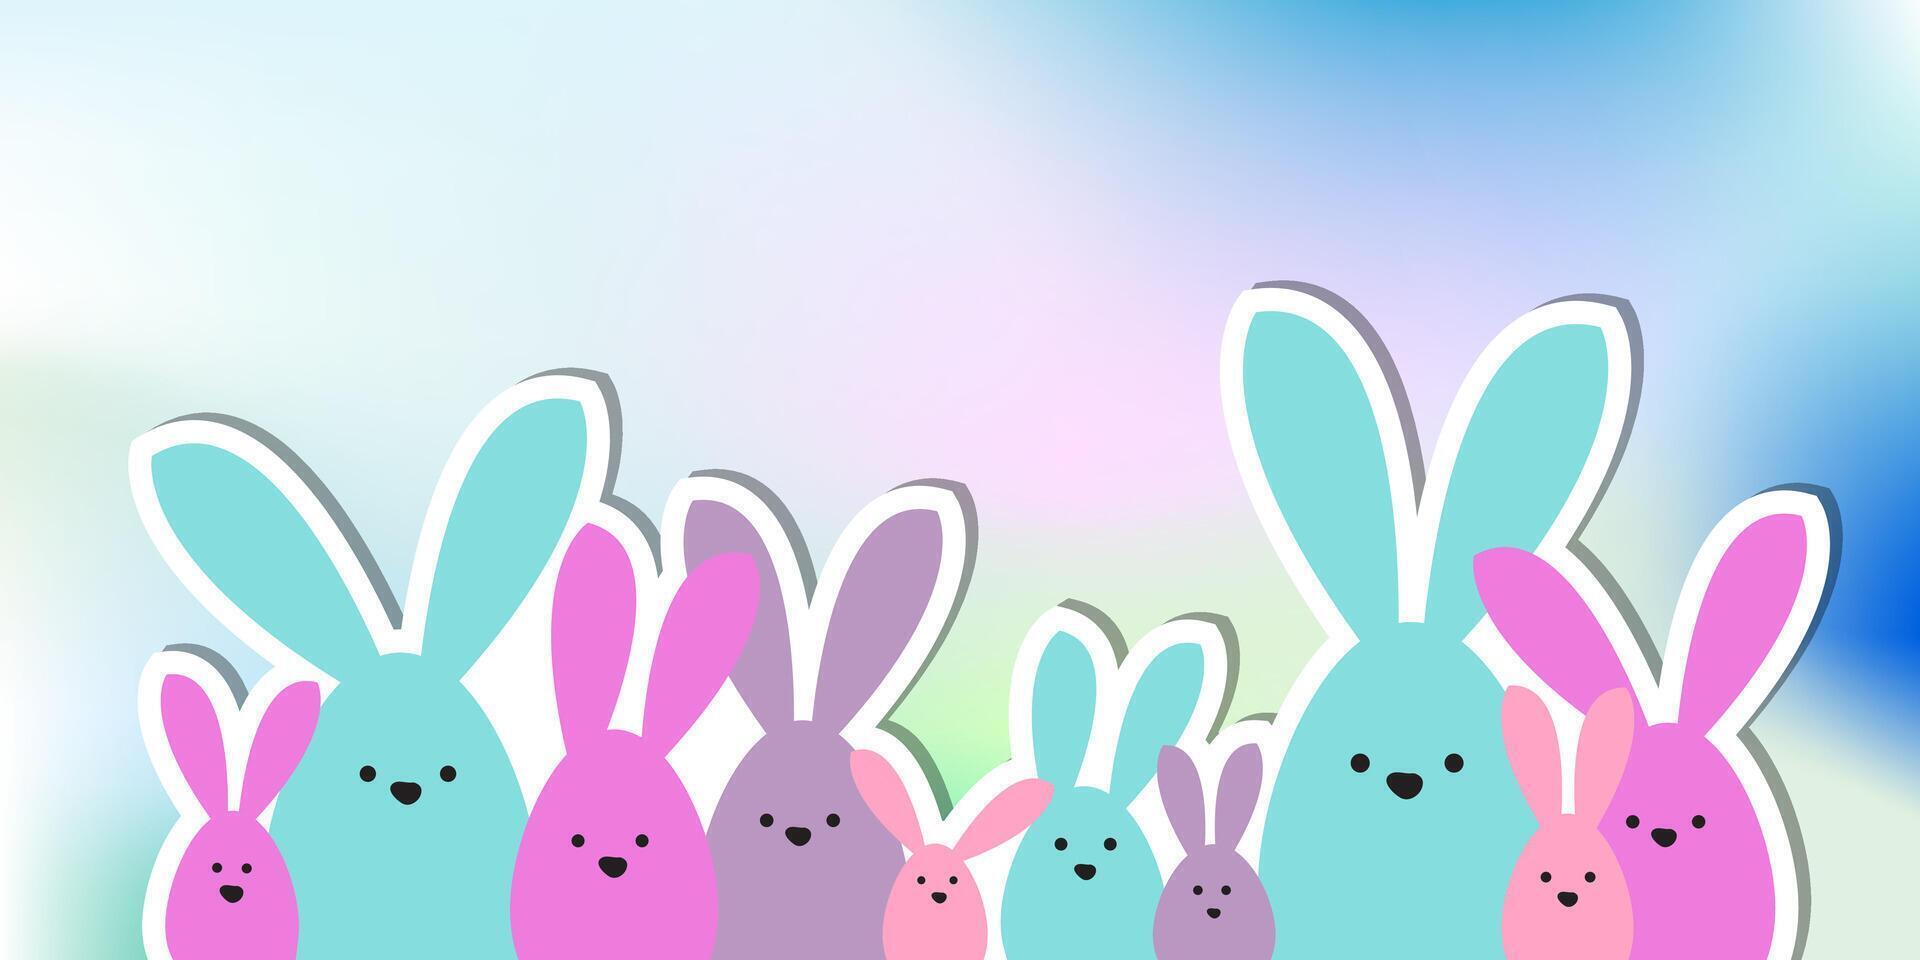 Celebration Greeting Easter card, colorful easter bunny family on polka dot background vector